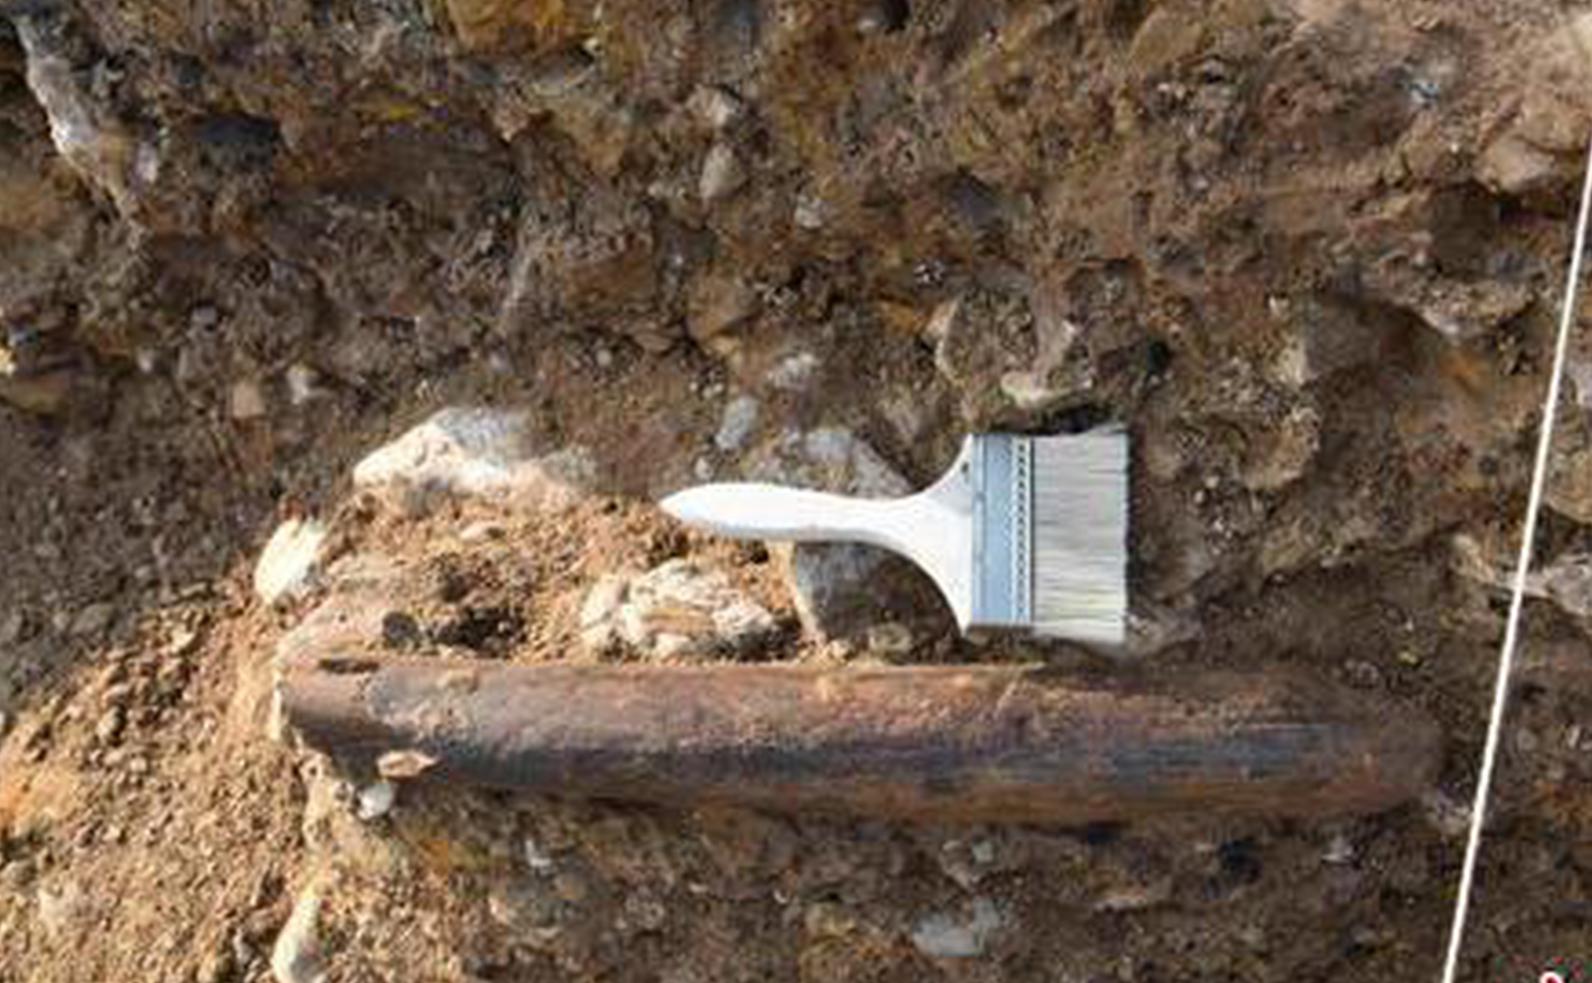 99,000-year-old ivory shovel may be earliest polished bone tool found in China